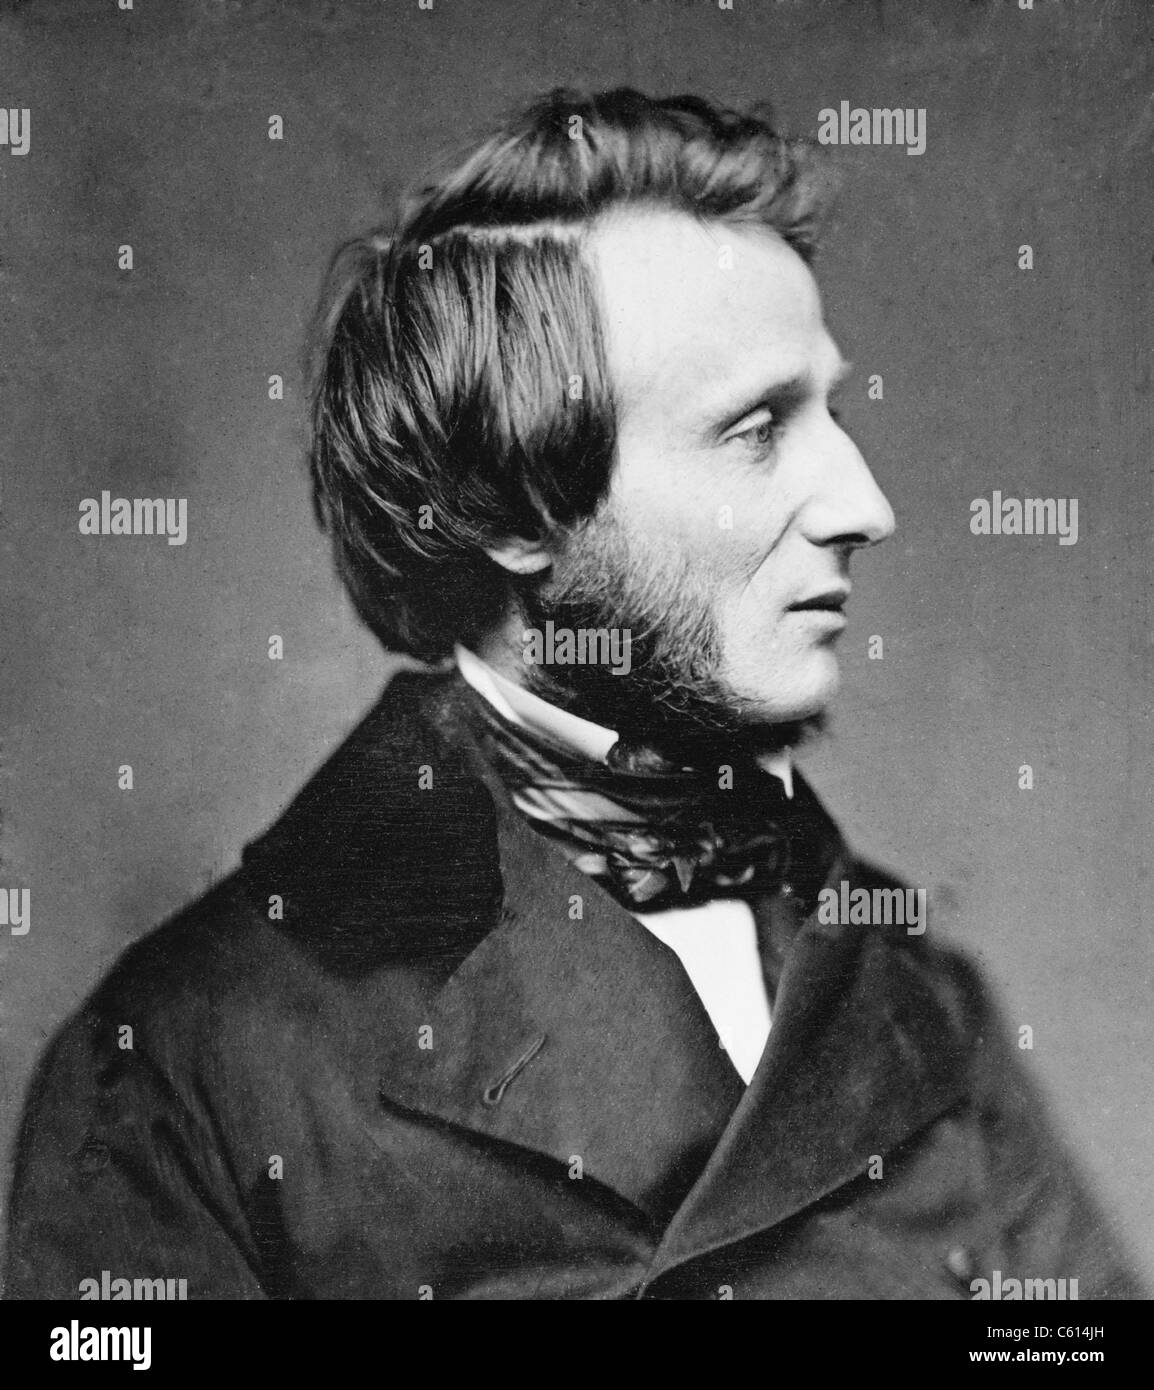 Cyrus West Field 1819-1892 the American financier and entrepreneur of the first telegraph cable across the Atlantic Ocean in 1858. Mathew Brady portrait ca. 1850. (BSLOC 2010 18 181) Stock Photo